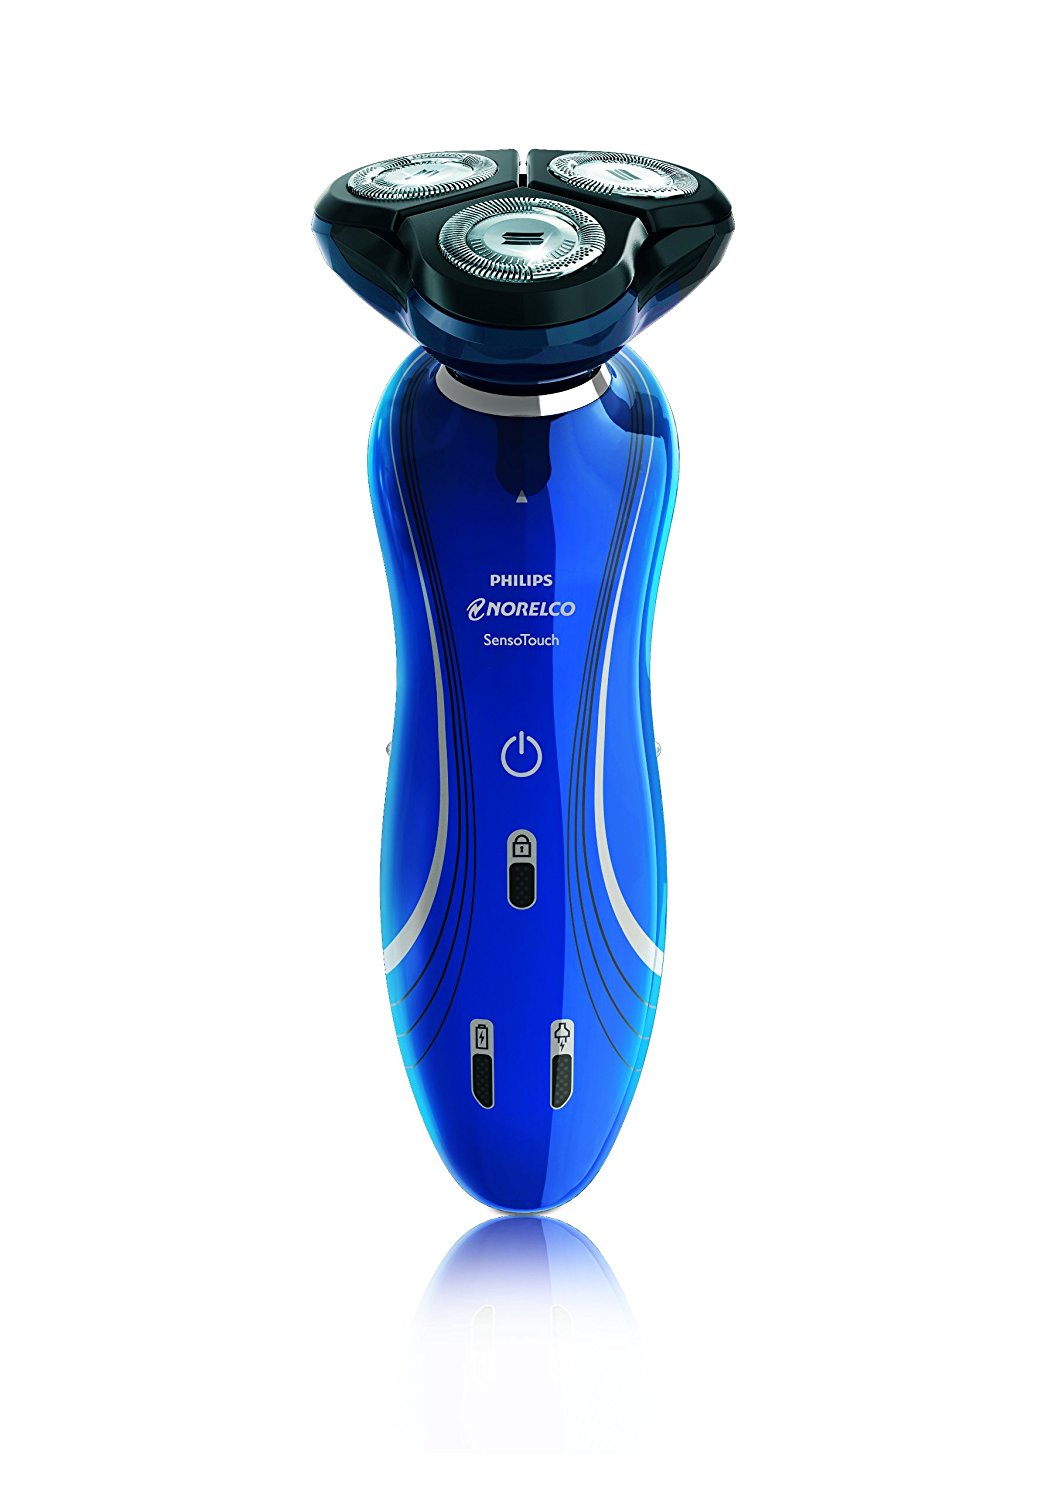 Philips Norelco Electric Men's Electric Shaver 6100, 1150X/40 - image 1 of 7